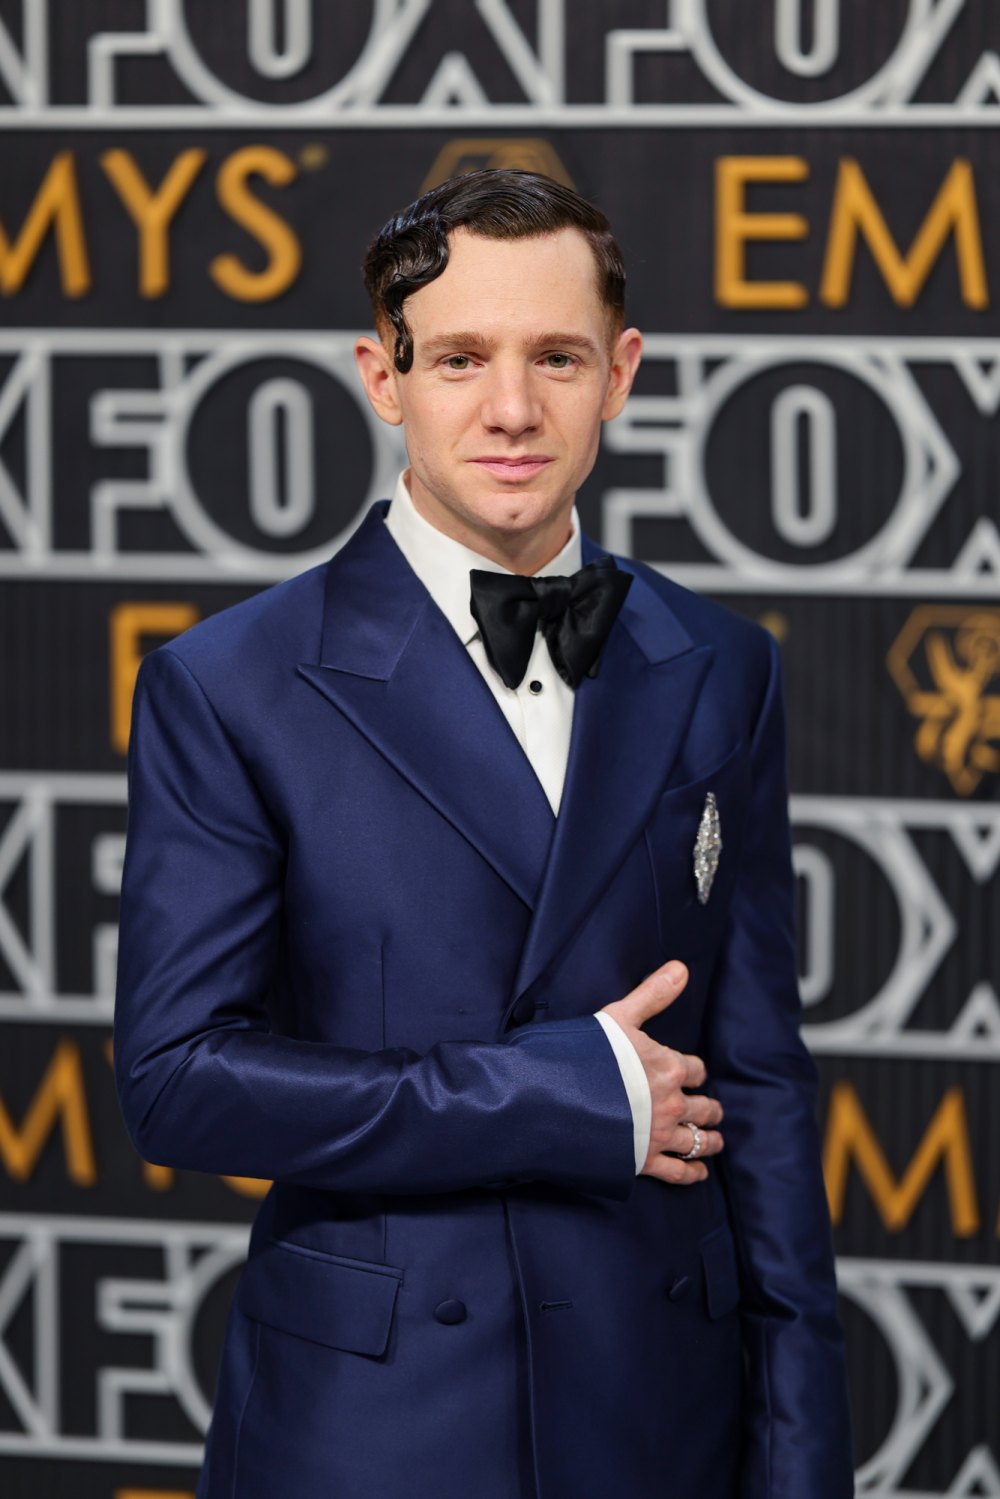 Chris Perfetti Sports Artfully Gelled Hair and a Sharp Navy Suit at the 2023 Emmys